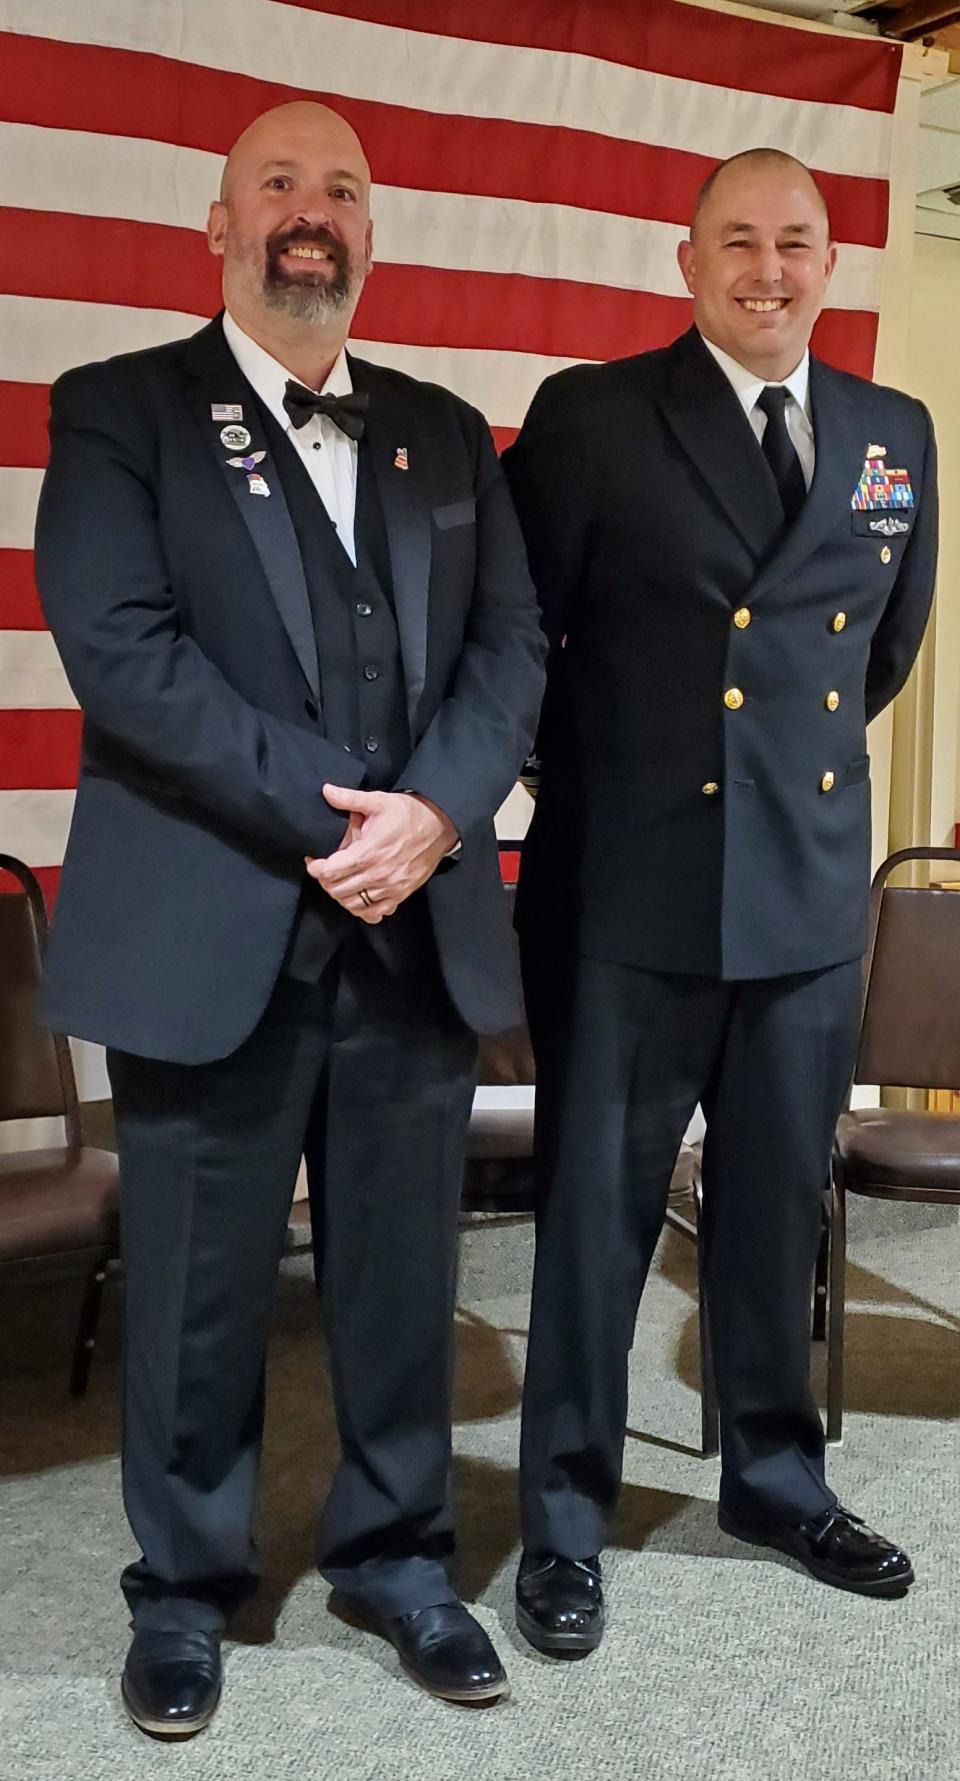 Rochester Elks Exalted Ruler Matt Sanborn poses for a picture with US Navy Commander, Jeffrey Smith who is currently the Executive Officer at the Portsmouth Naval Shipyard.